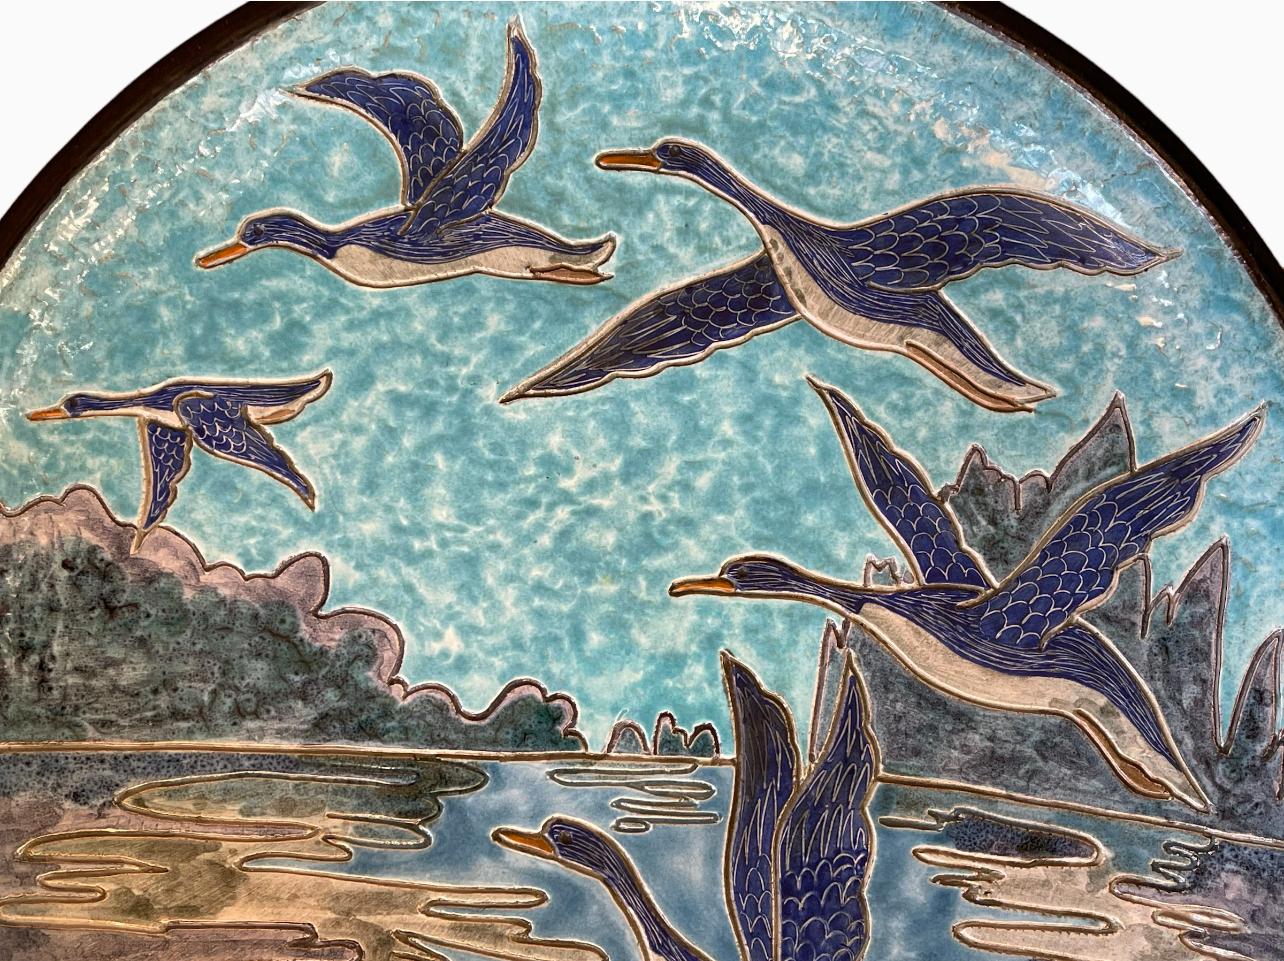 Large ceramic hollow dish representing wild ducks in flight on a turquoise blue background. Signed 